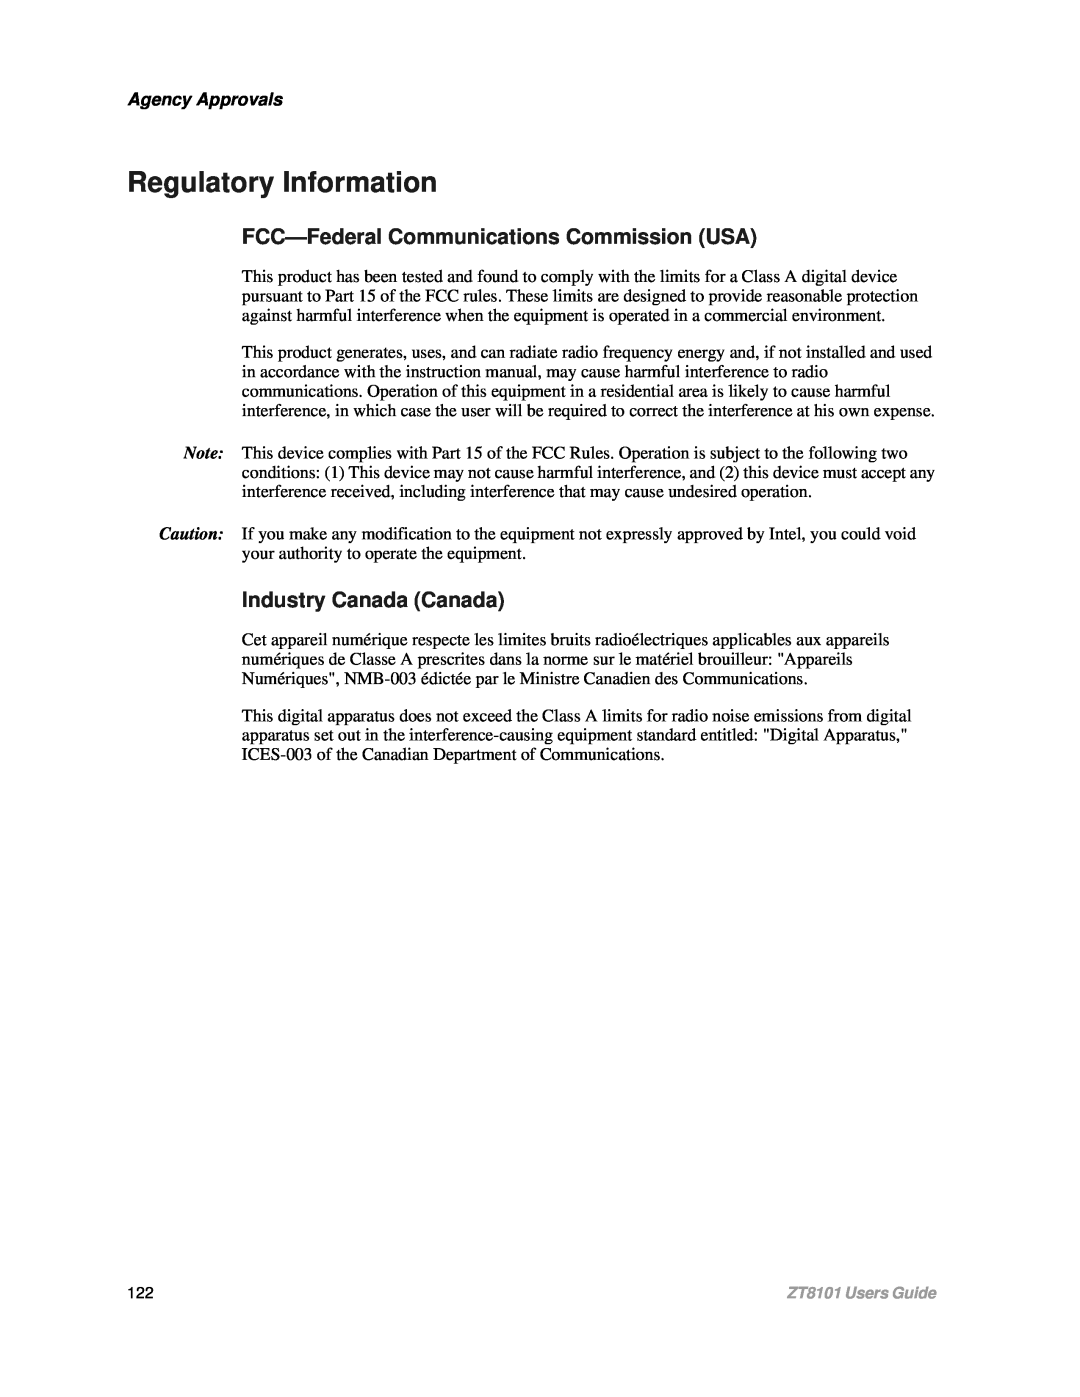 Intel ZT8101 Regulatory Information, FCC-FederalCommunications Commission USA, Industry Canada Canada, Agency Approvals 